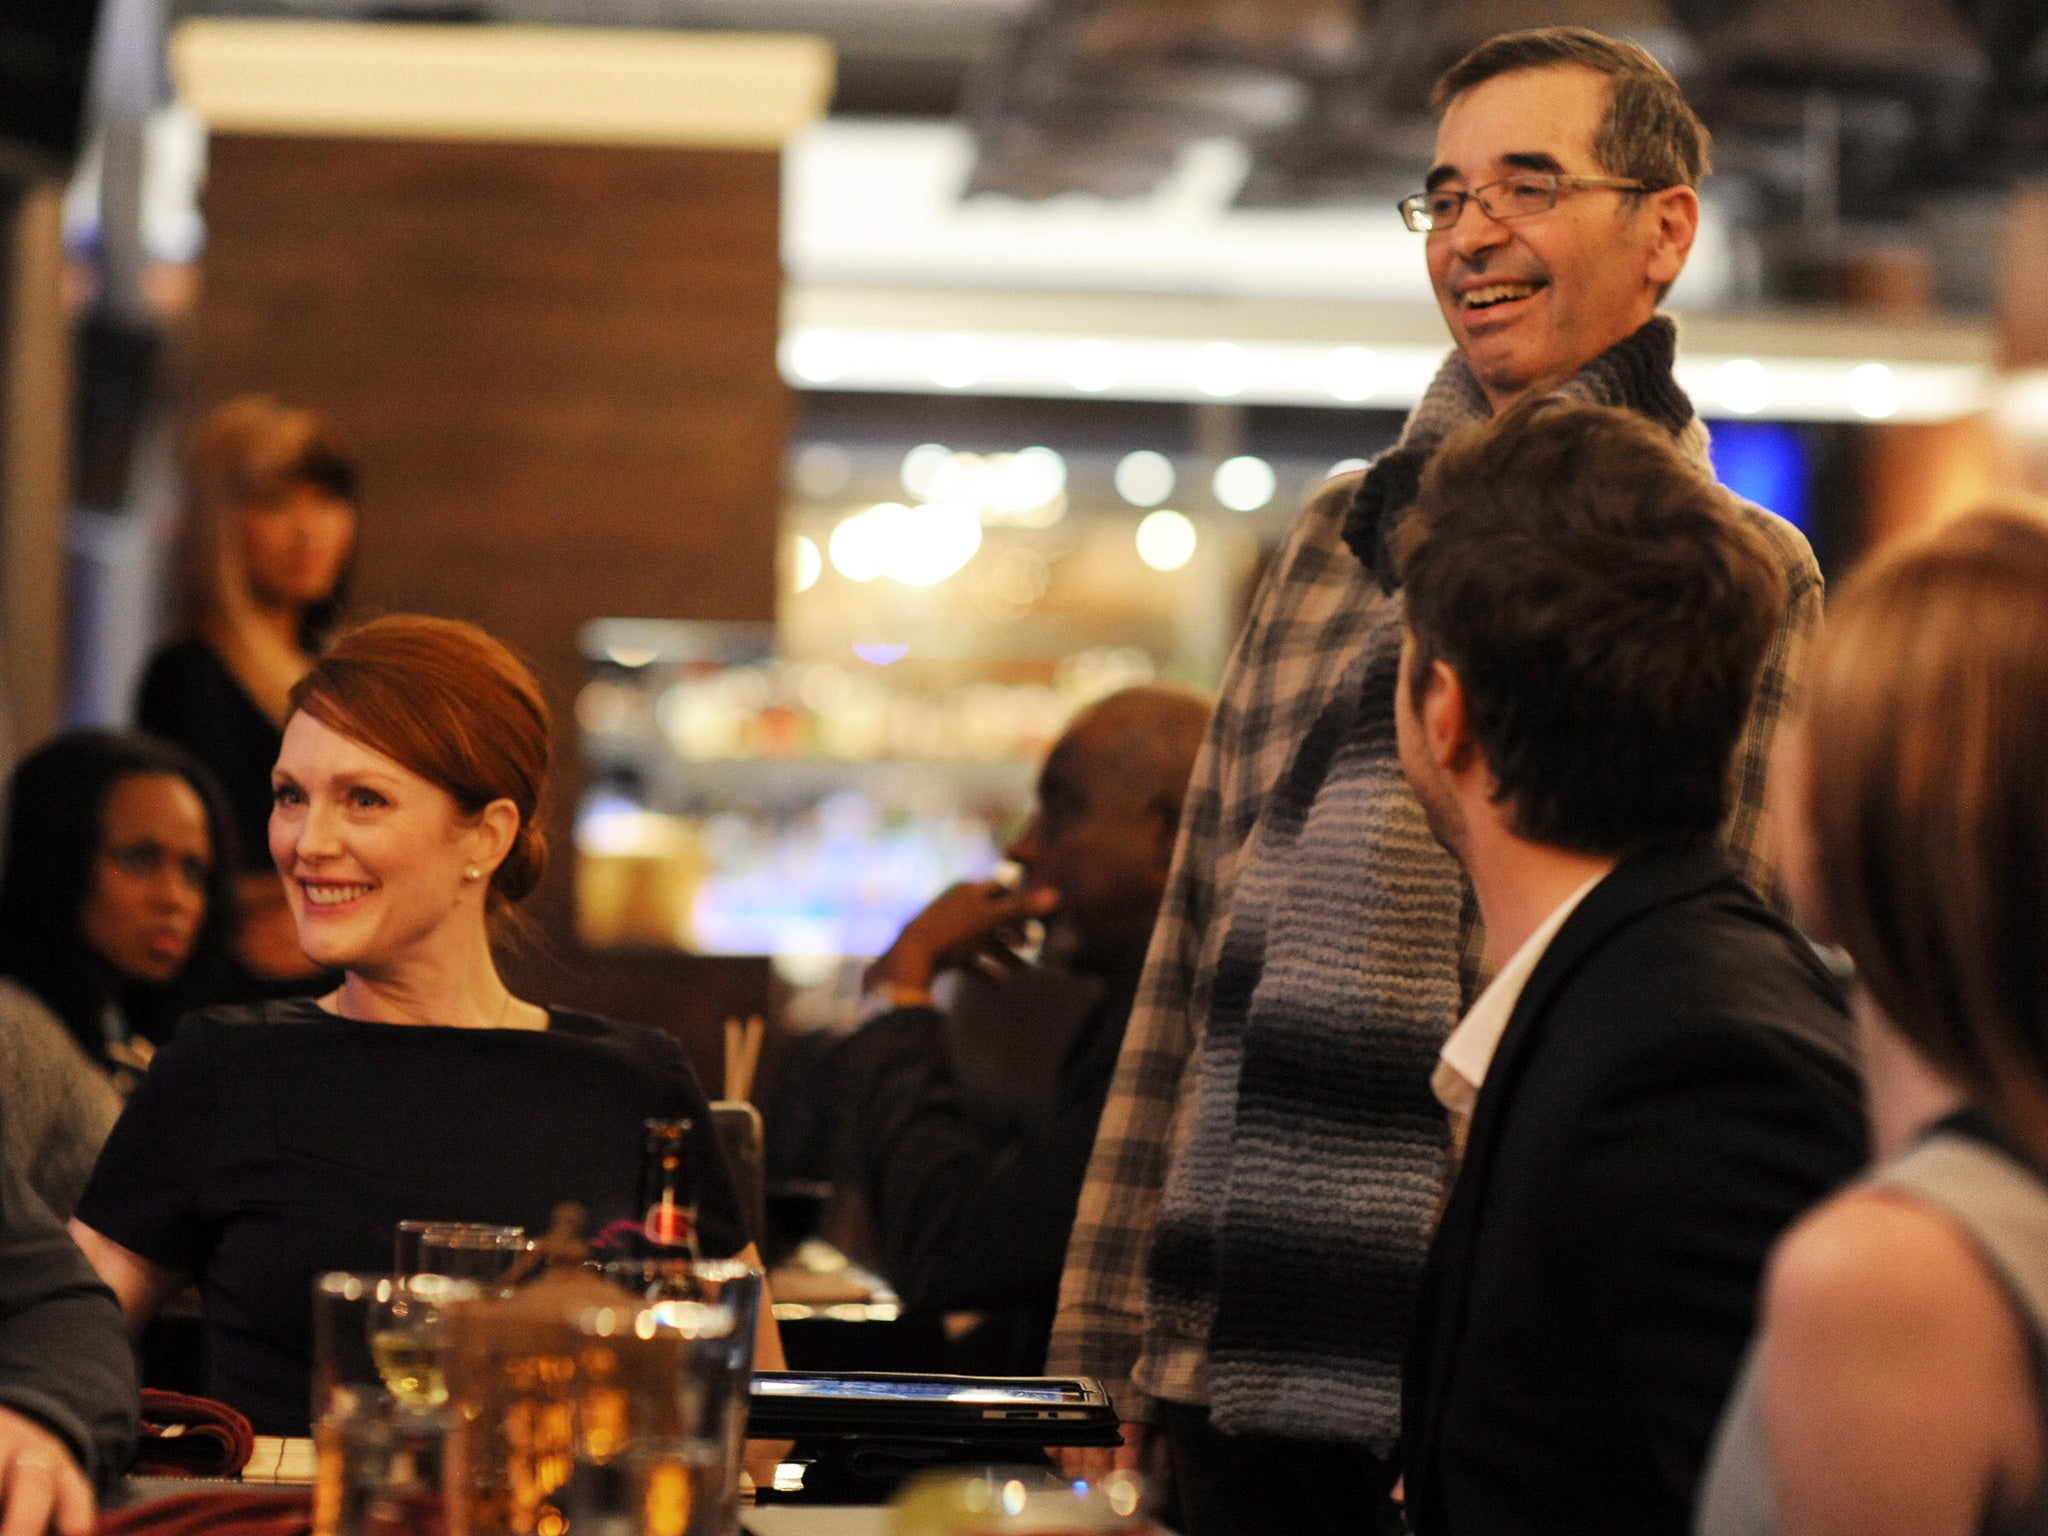 Julianne Moore and co-director Richard Glatzer, standing, on the set during the filming of ‘Still Alice’ in New York